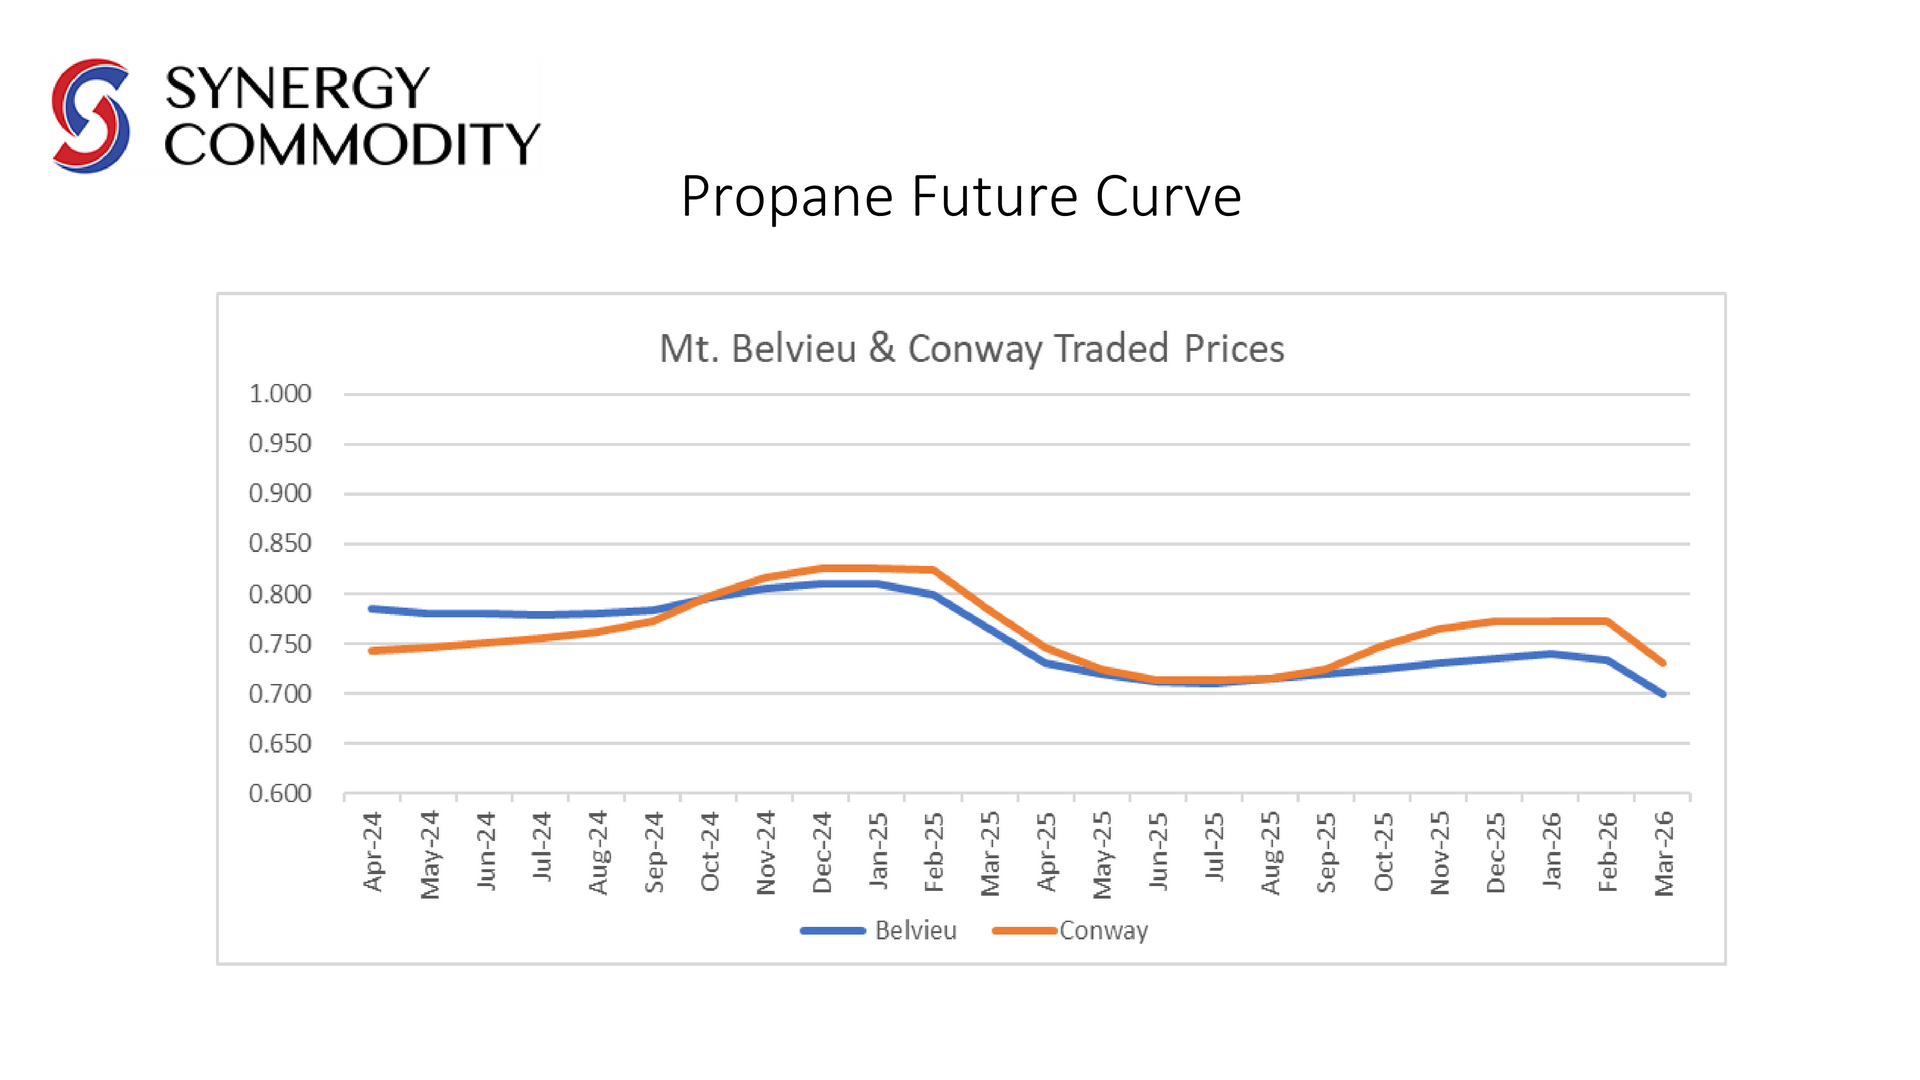 A graph showing the price of propane in the future